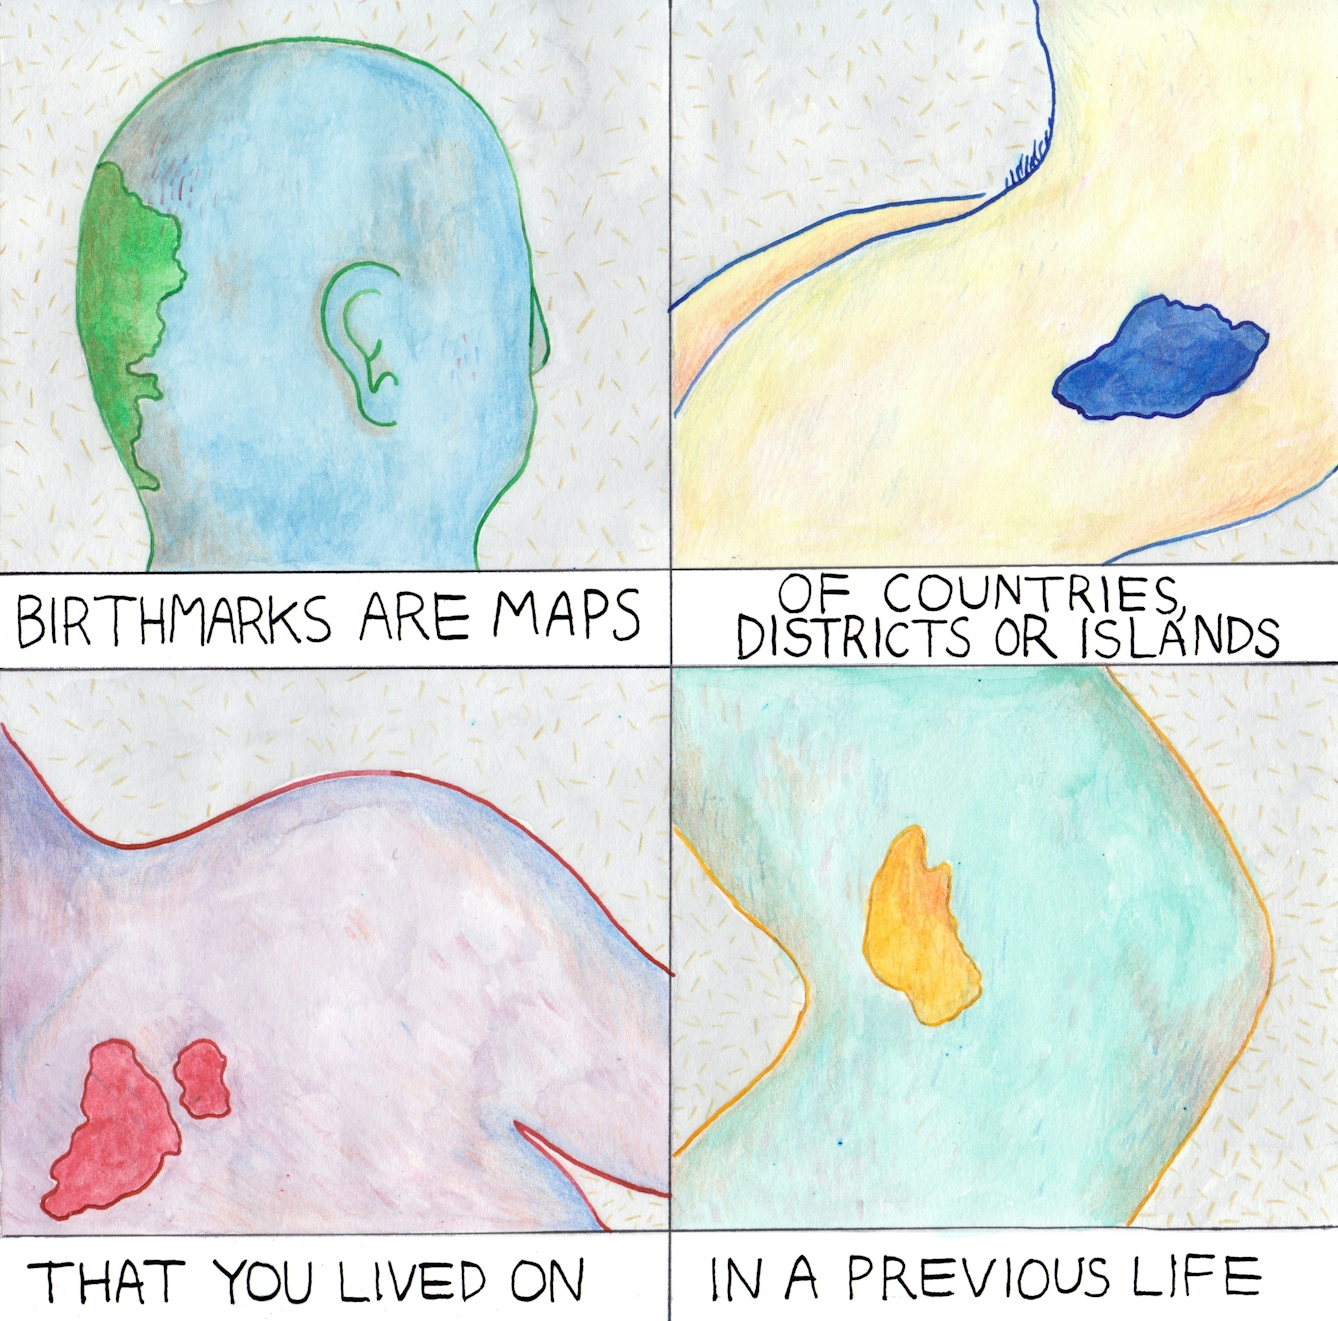 A hand drawn comic exploring the meaning of birthmarks on the body.